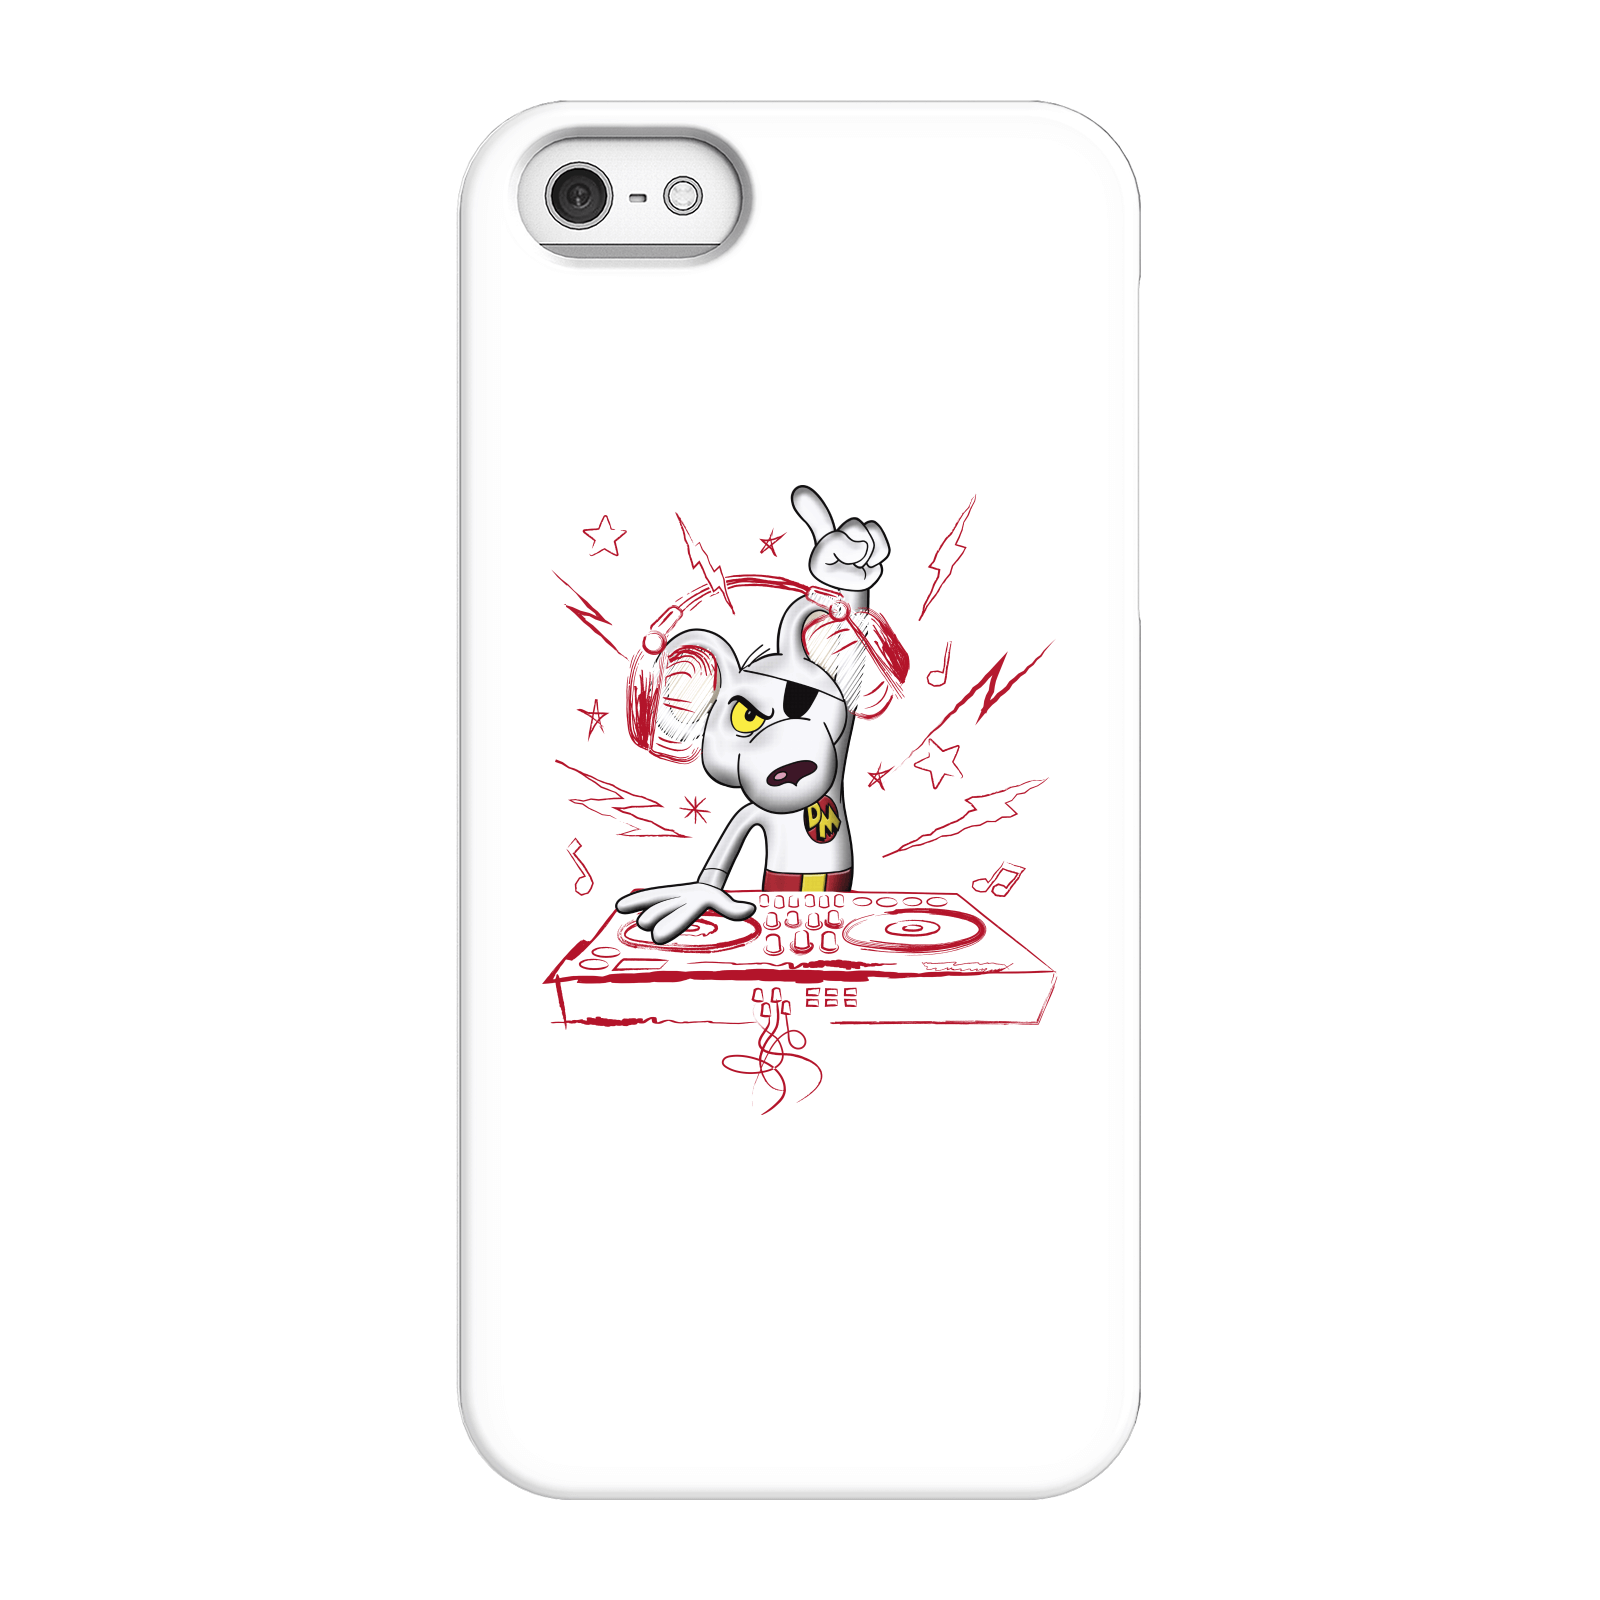 Danger Mouse DJ Phone Case for iPhone and Android - iPhone 5/5s - Snap Case - Gloss